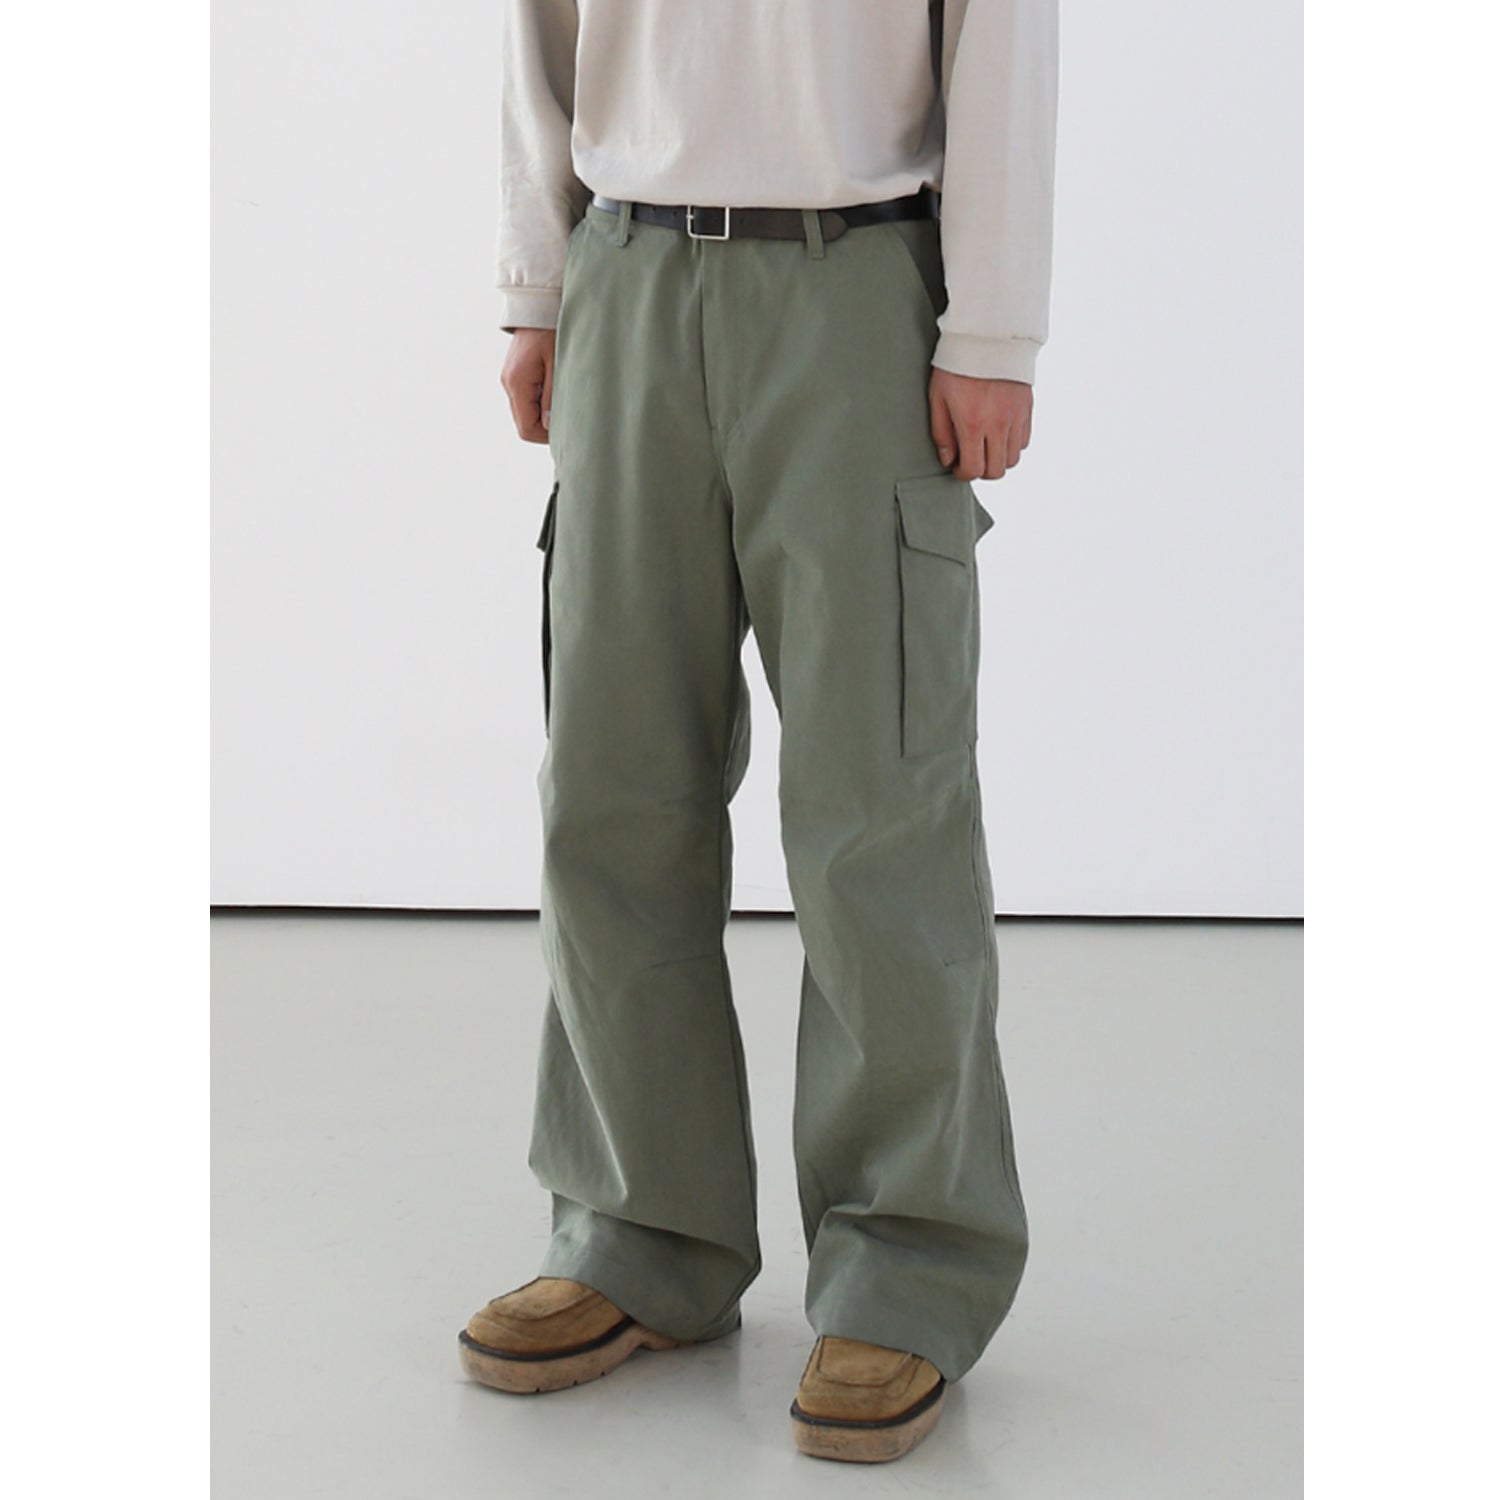 NR PITCH WIDE CARGO PANT'S